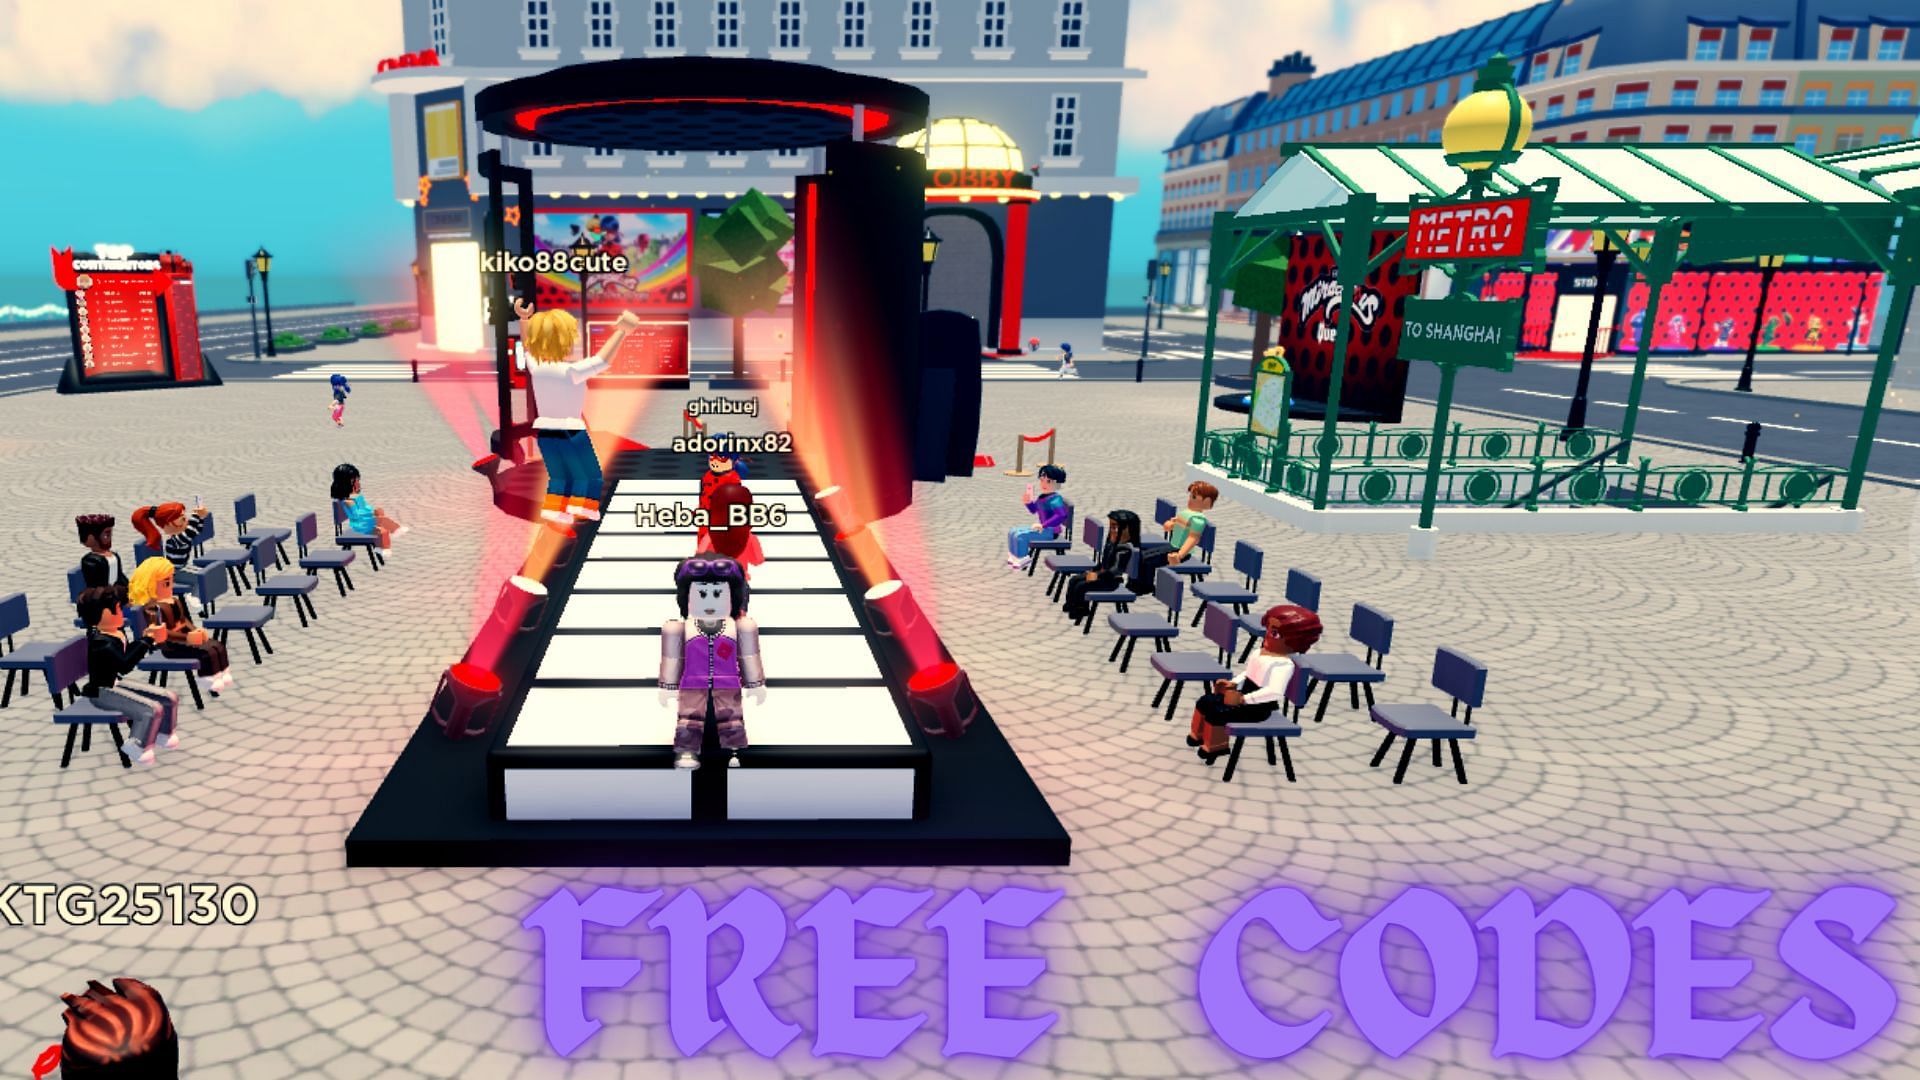 Free codes in Miraculous RP (Image via Roblox)